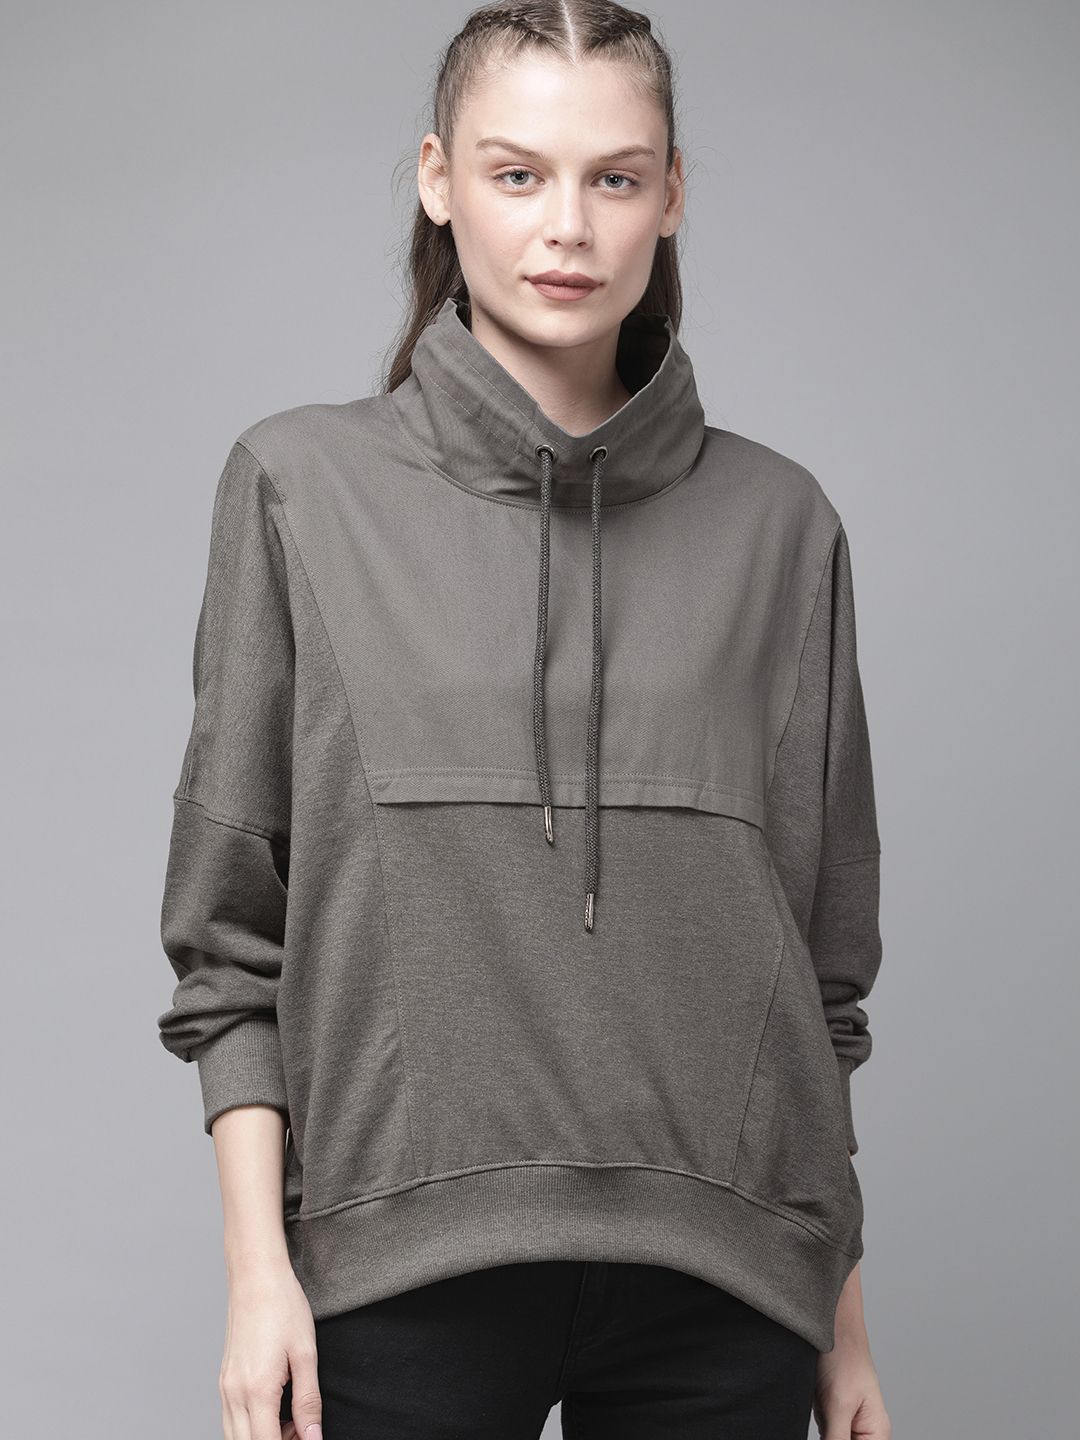 The Roadster Lifestyle Co Women Grey Solid Sweatshirt Price in India